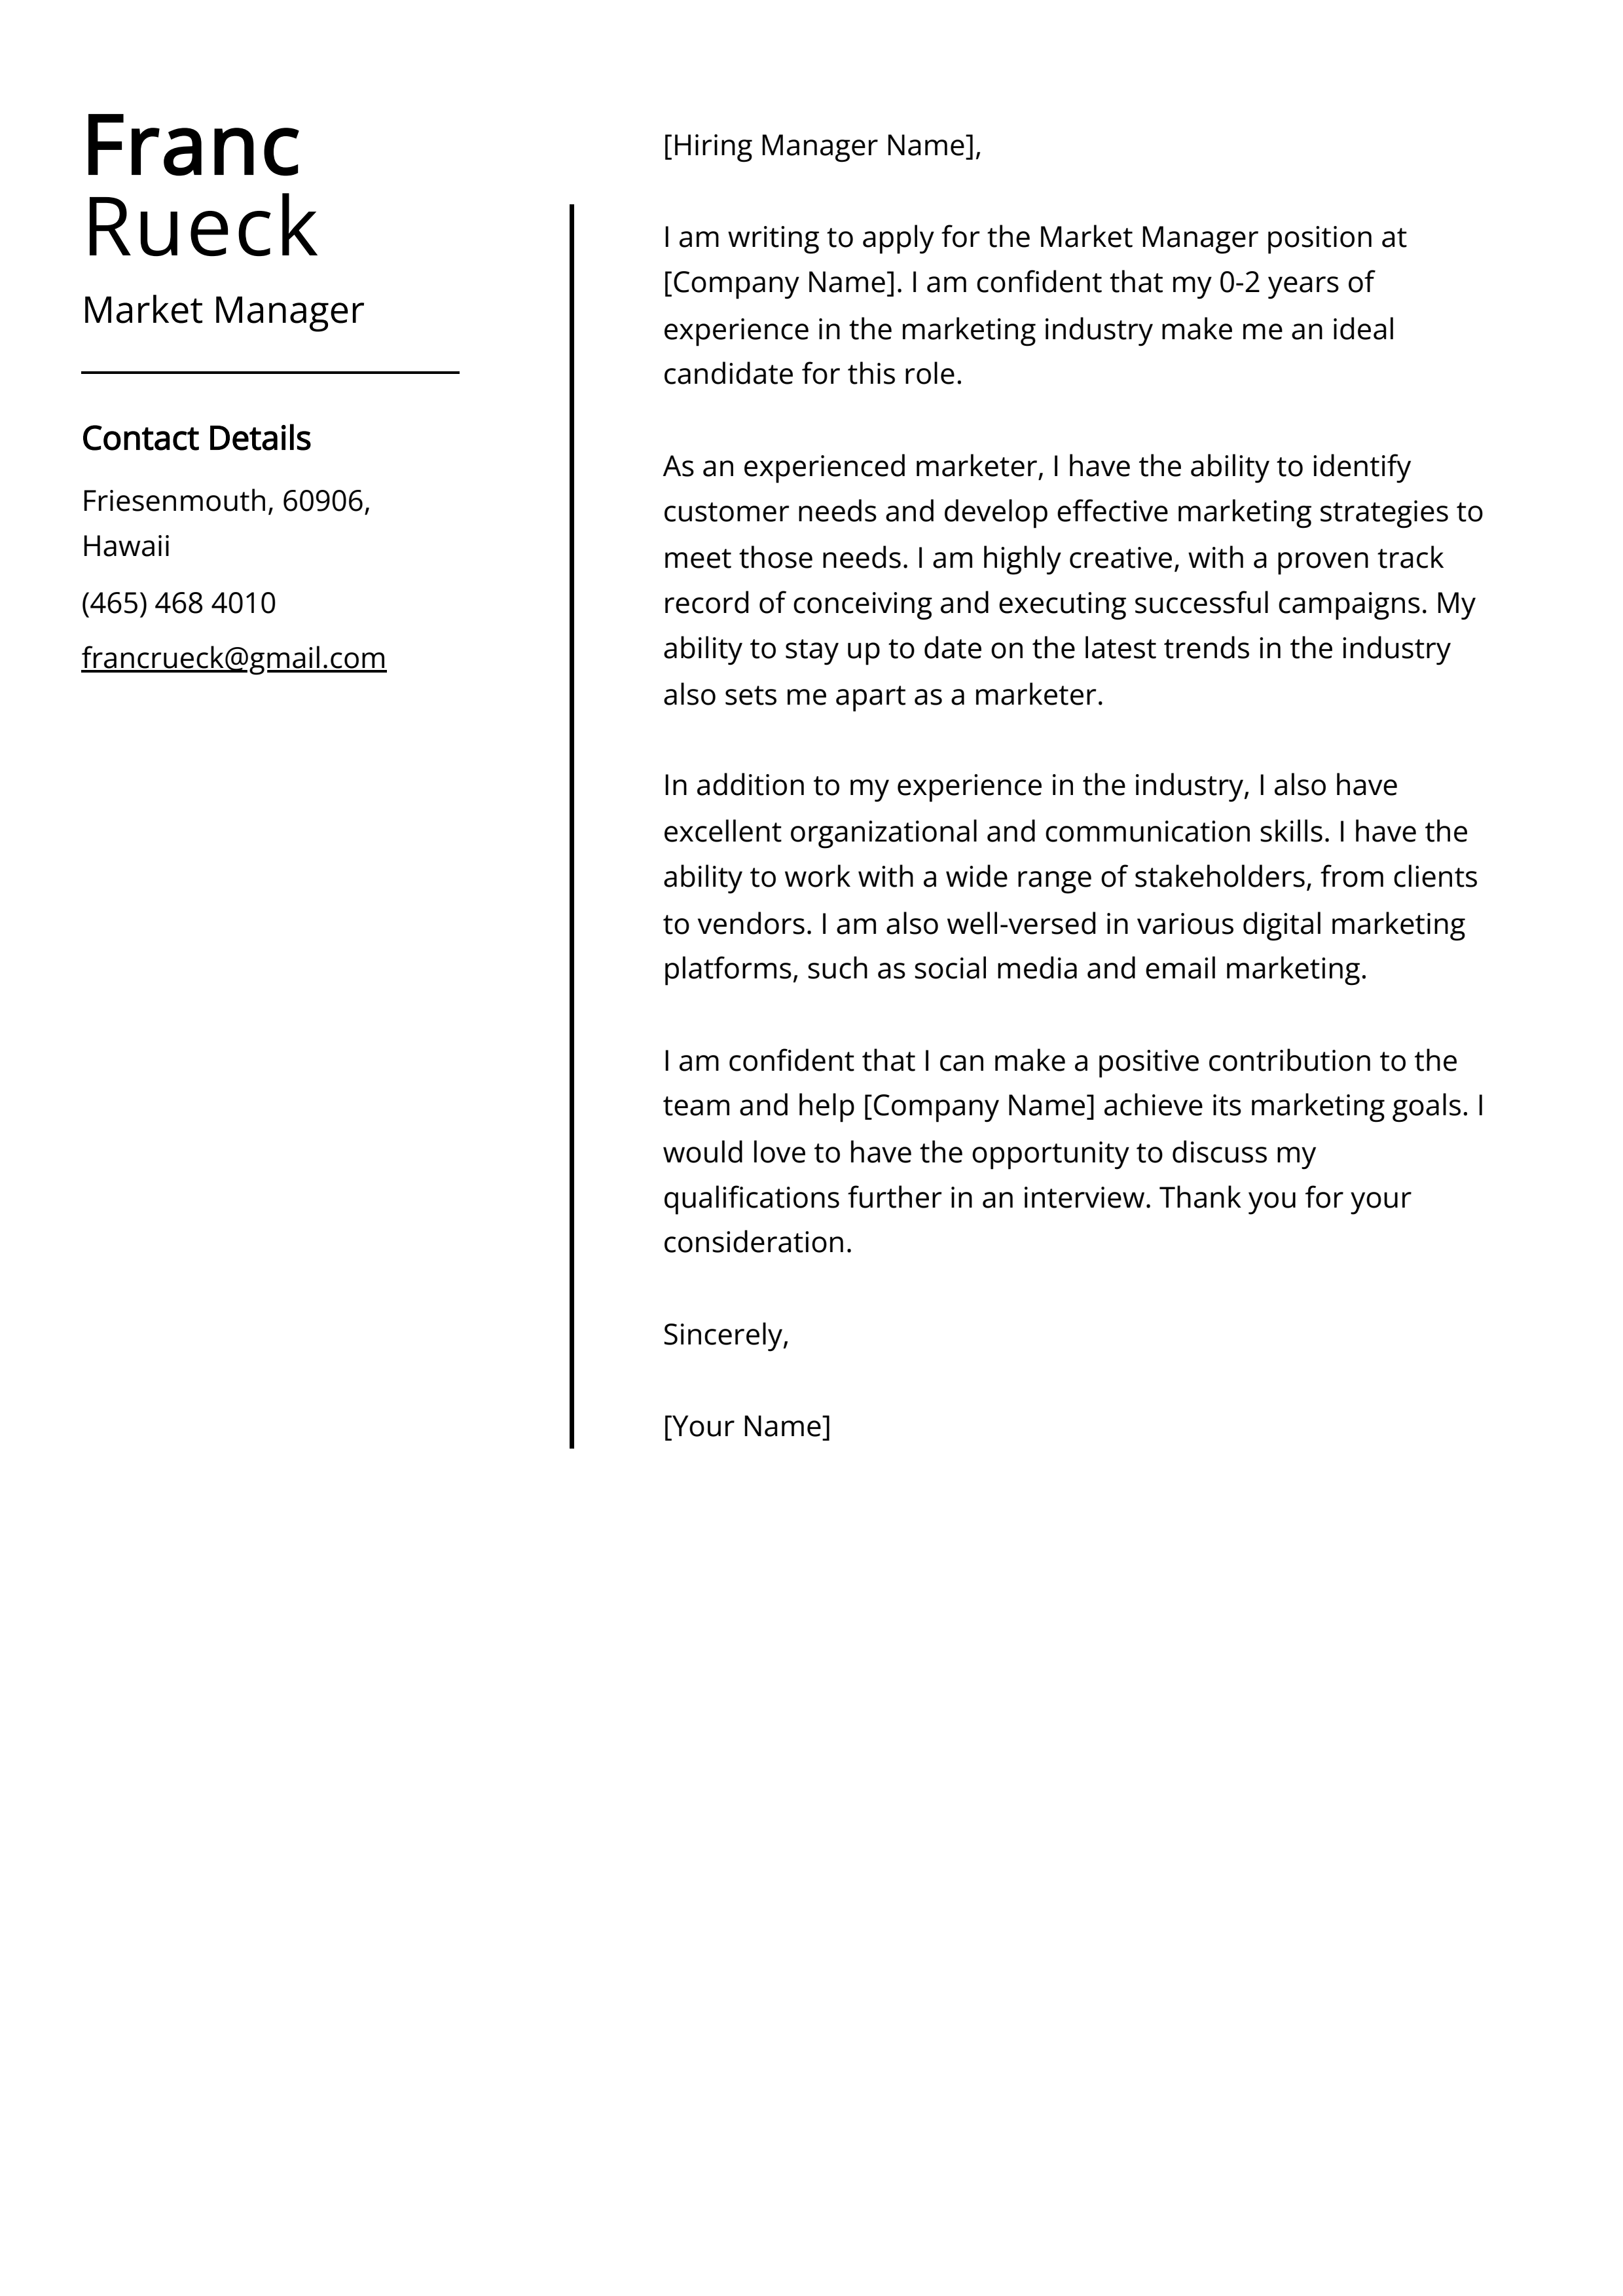 Market Manager Cover Letter Example